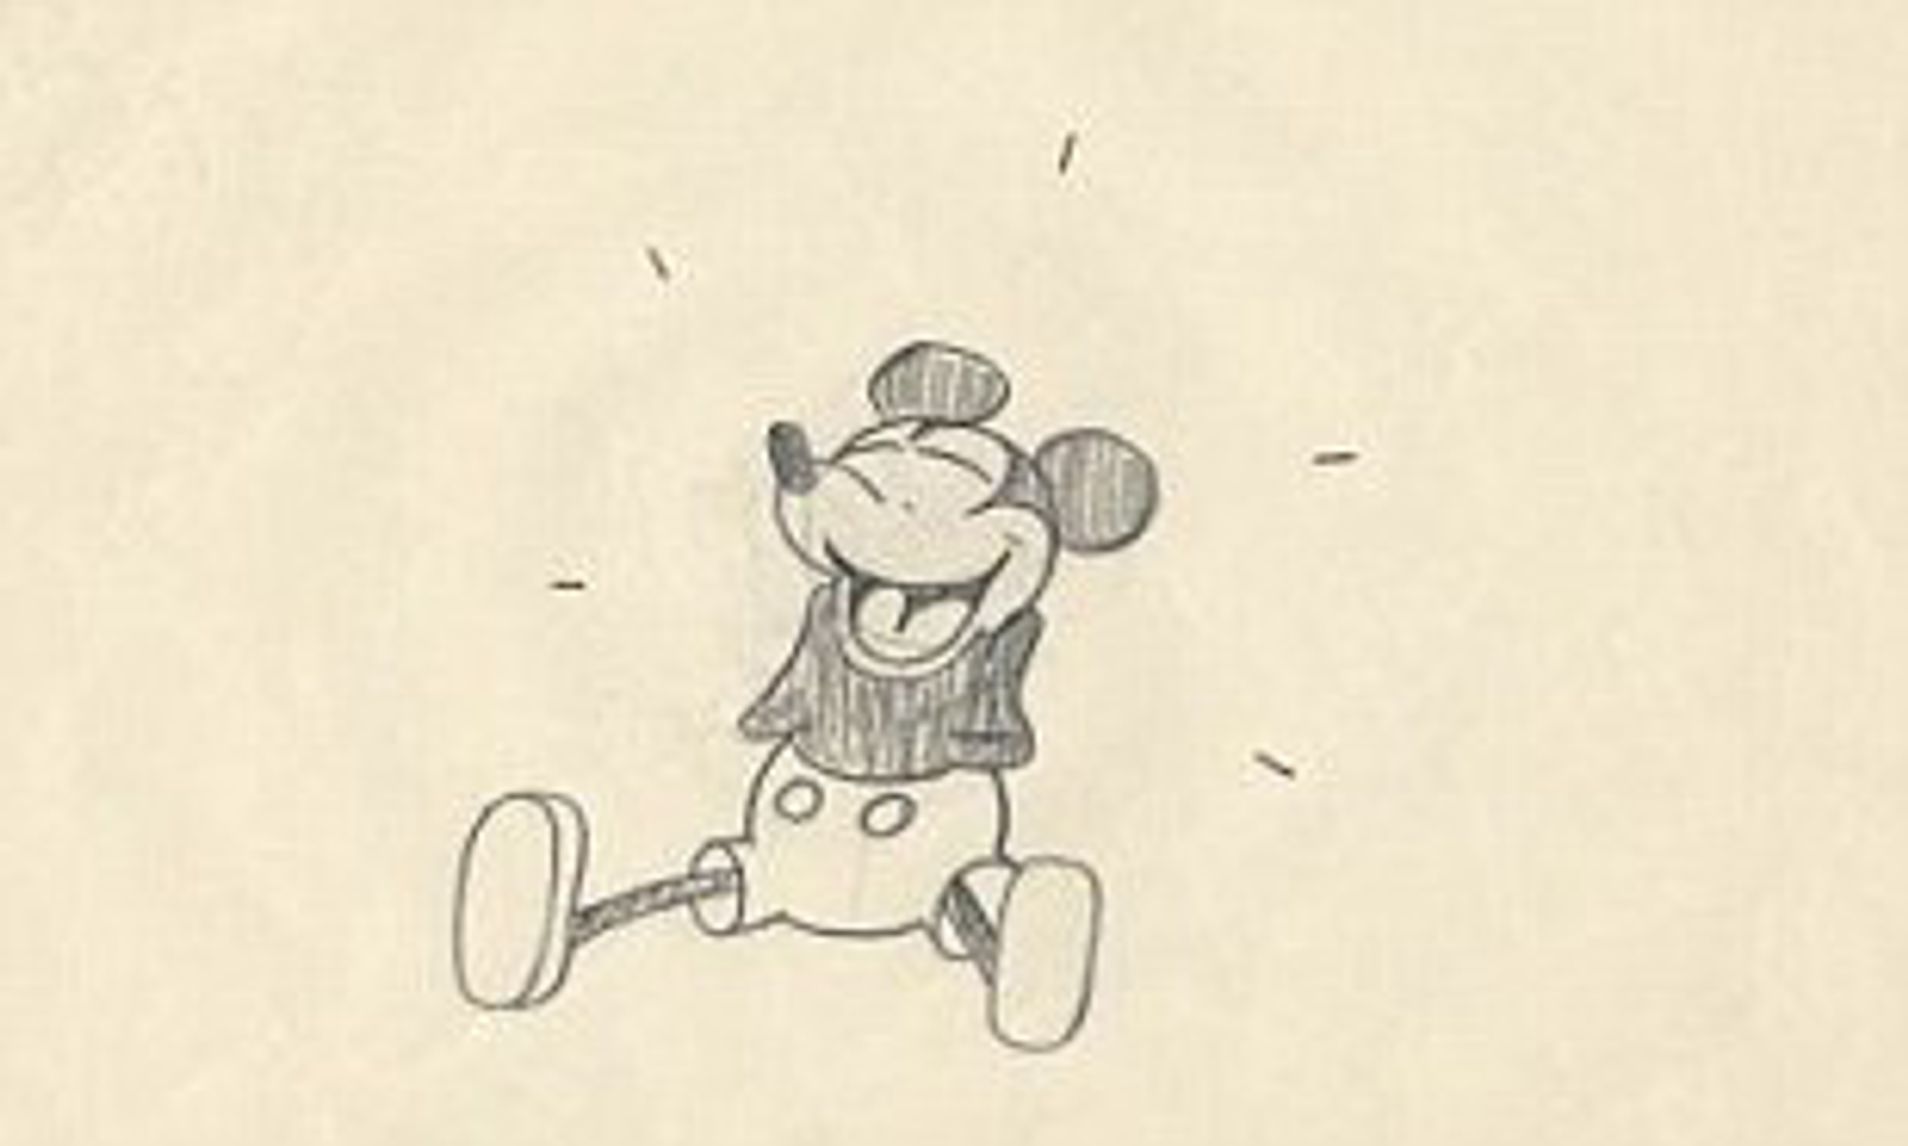 Mickey Mouse drawing by Ub Iwerks Communerdy Creation of Mickey Mouse